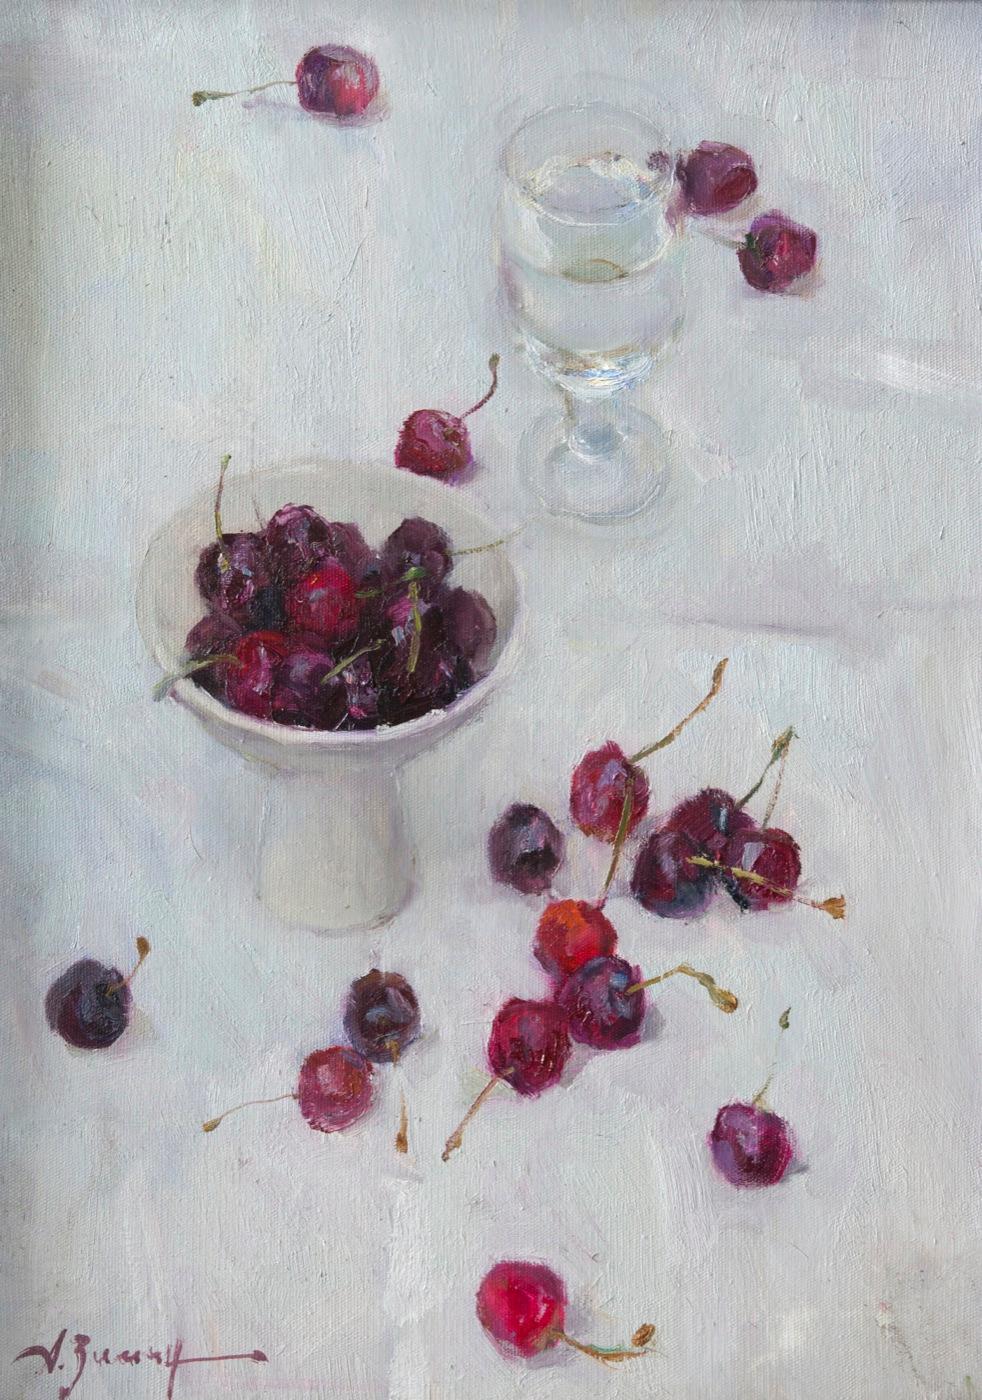 Sweet cherry on a white tablecloth. Original modern art painting